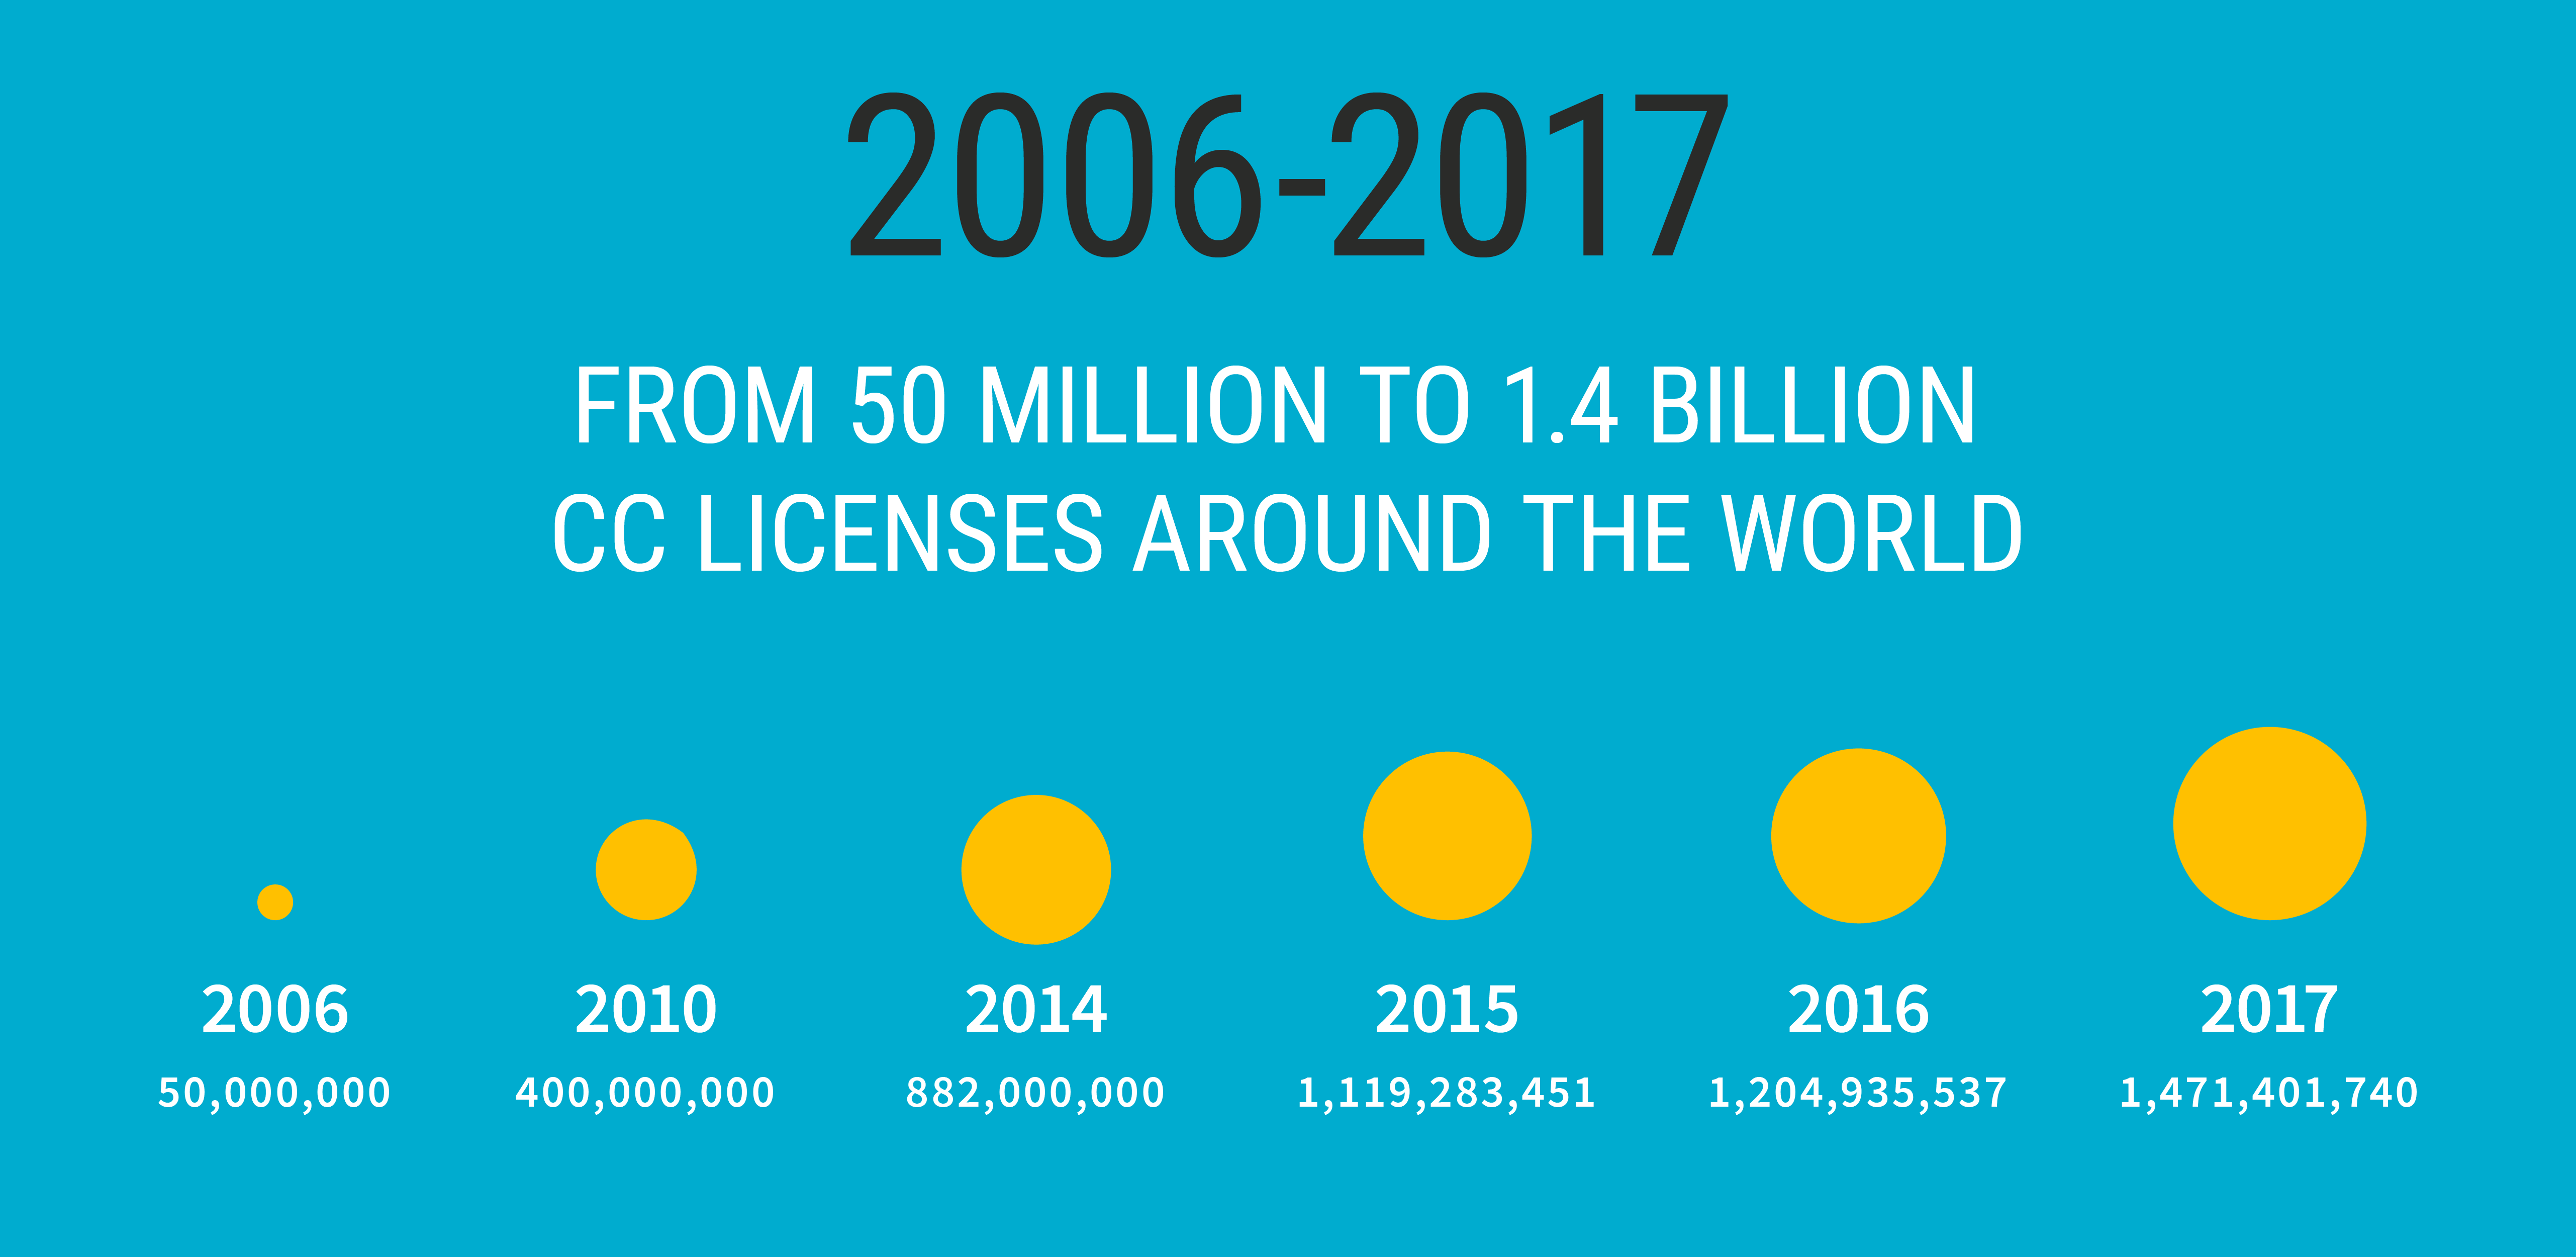 growth of cc licenses